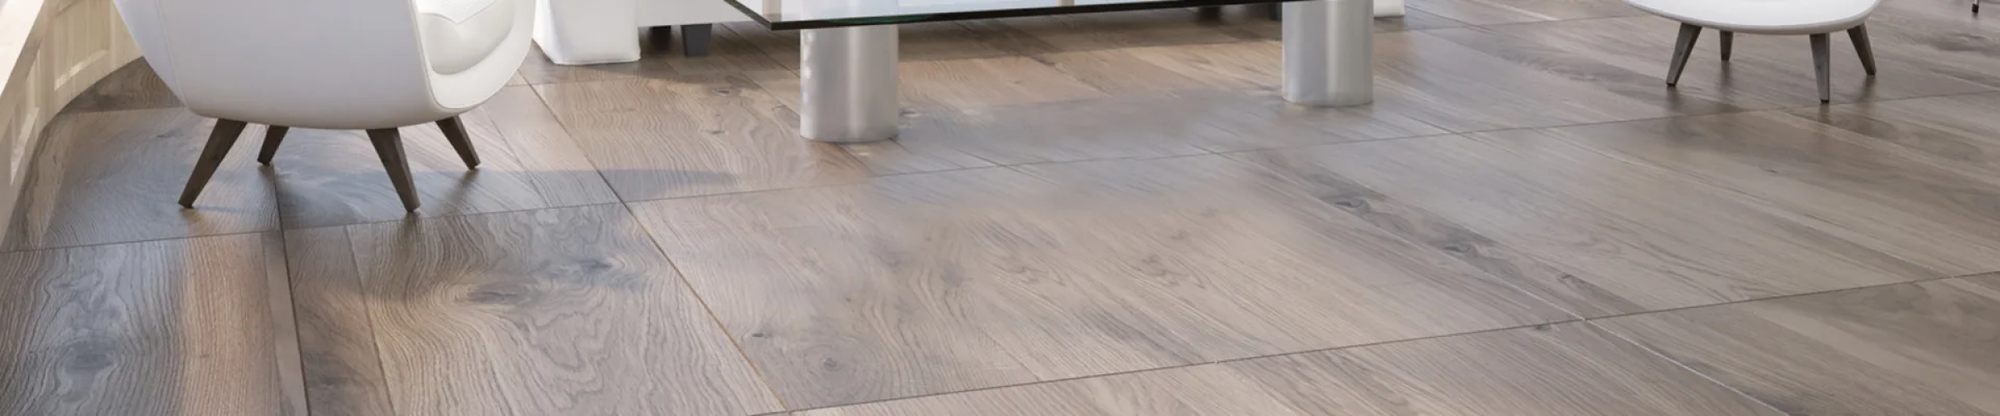 Buy now and pay over time with Floors USA